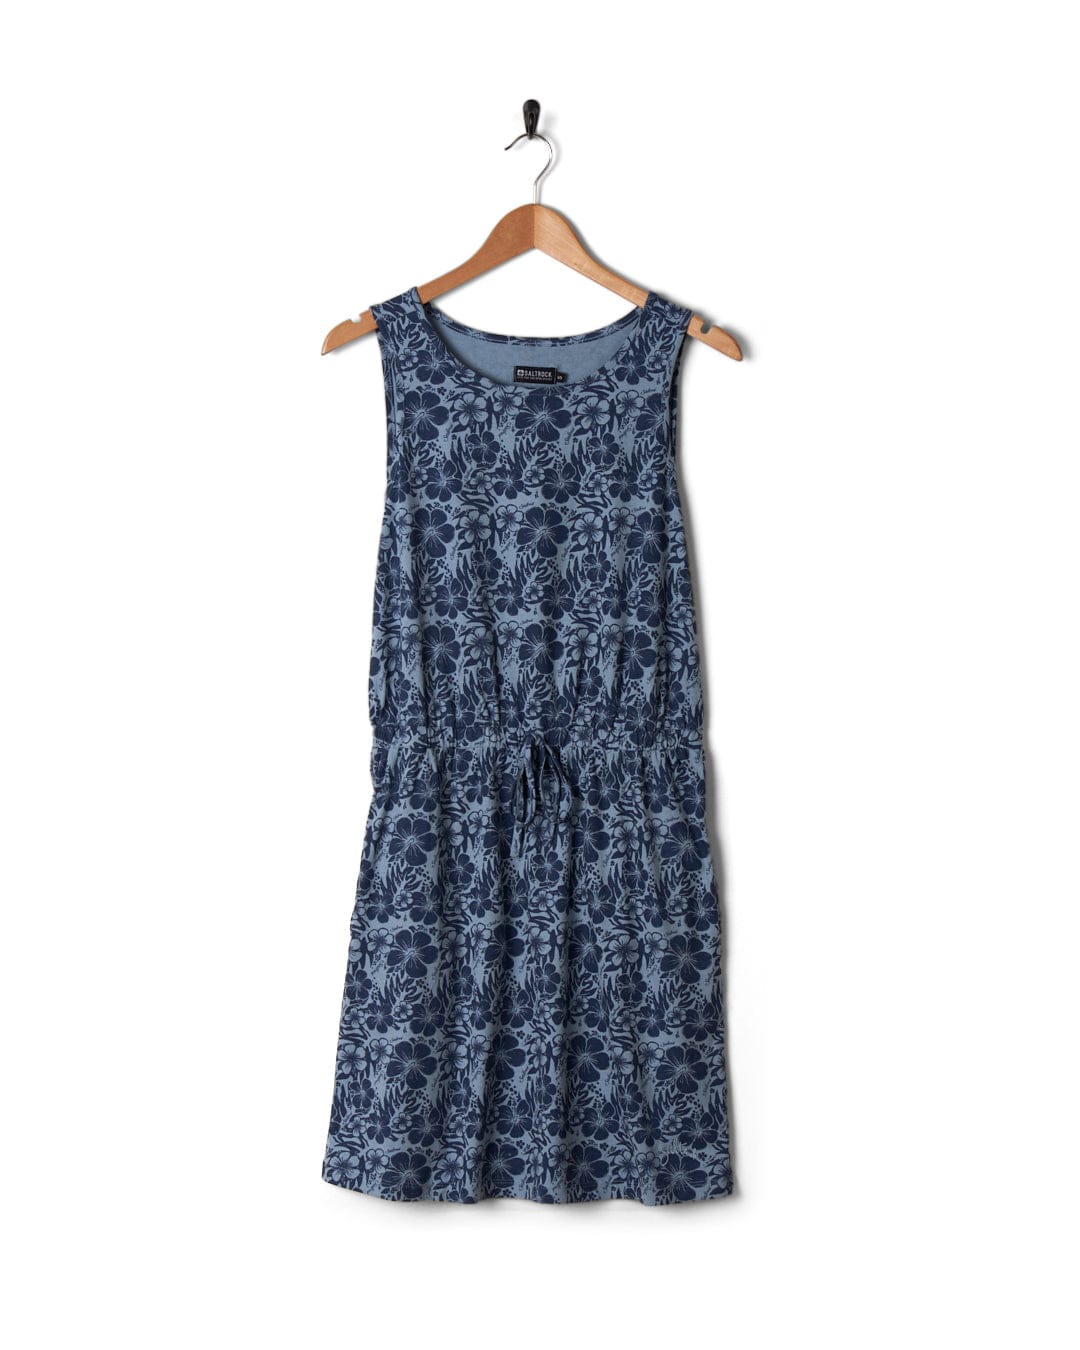 Blue floral dress featuring Hibiscus Bauhaus, hanging on a wooden hanger against a white background. Brand: Saltrock